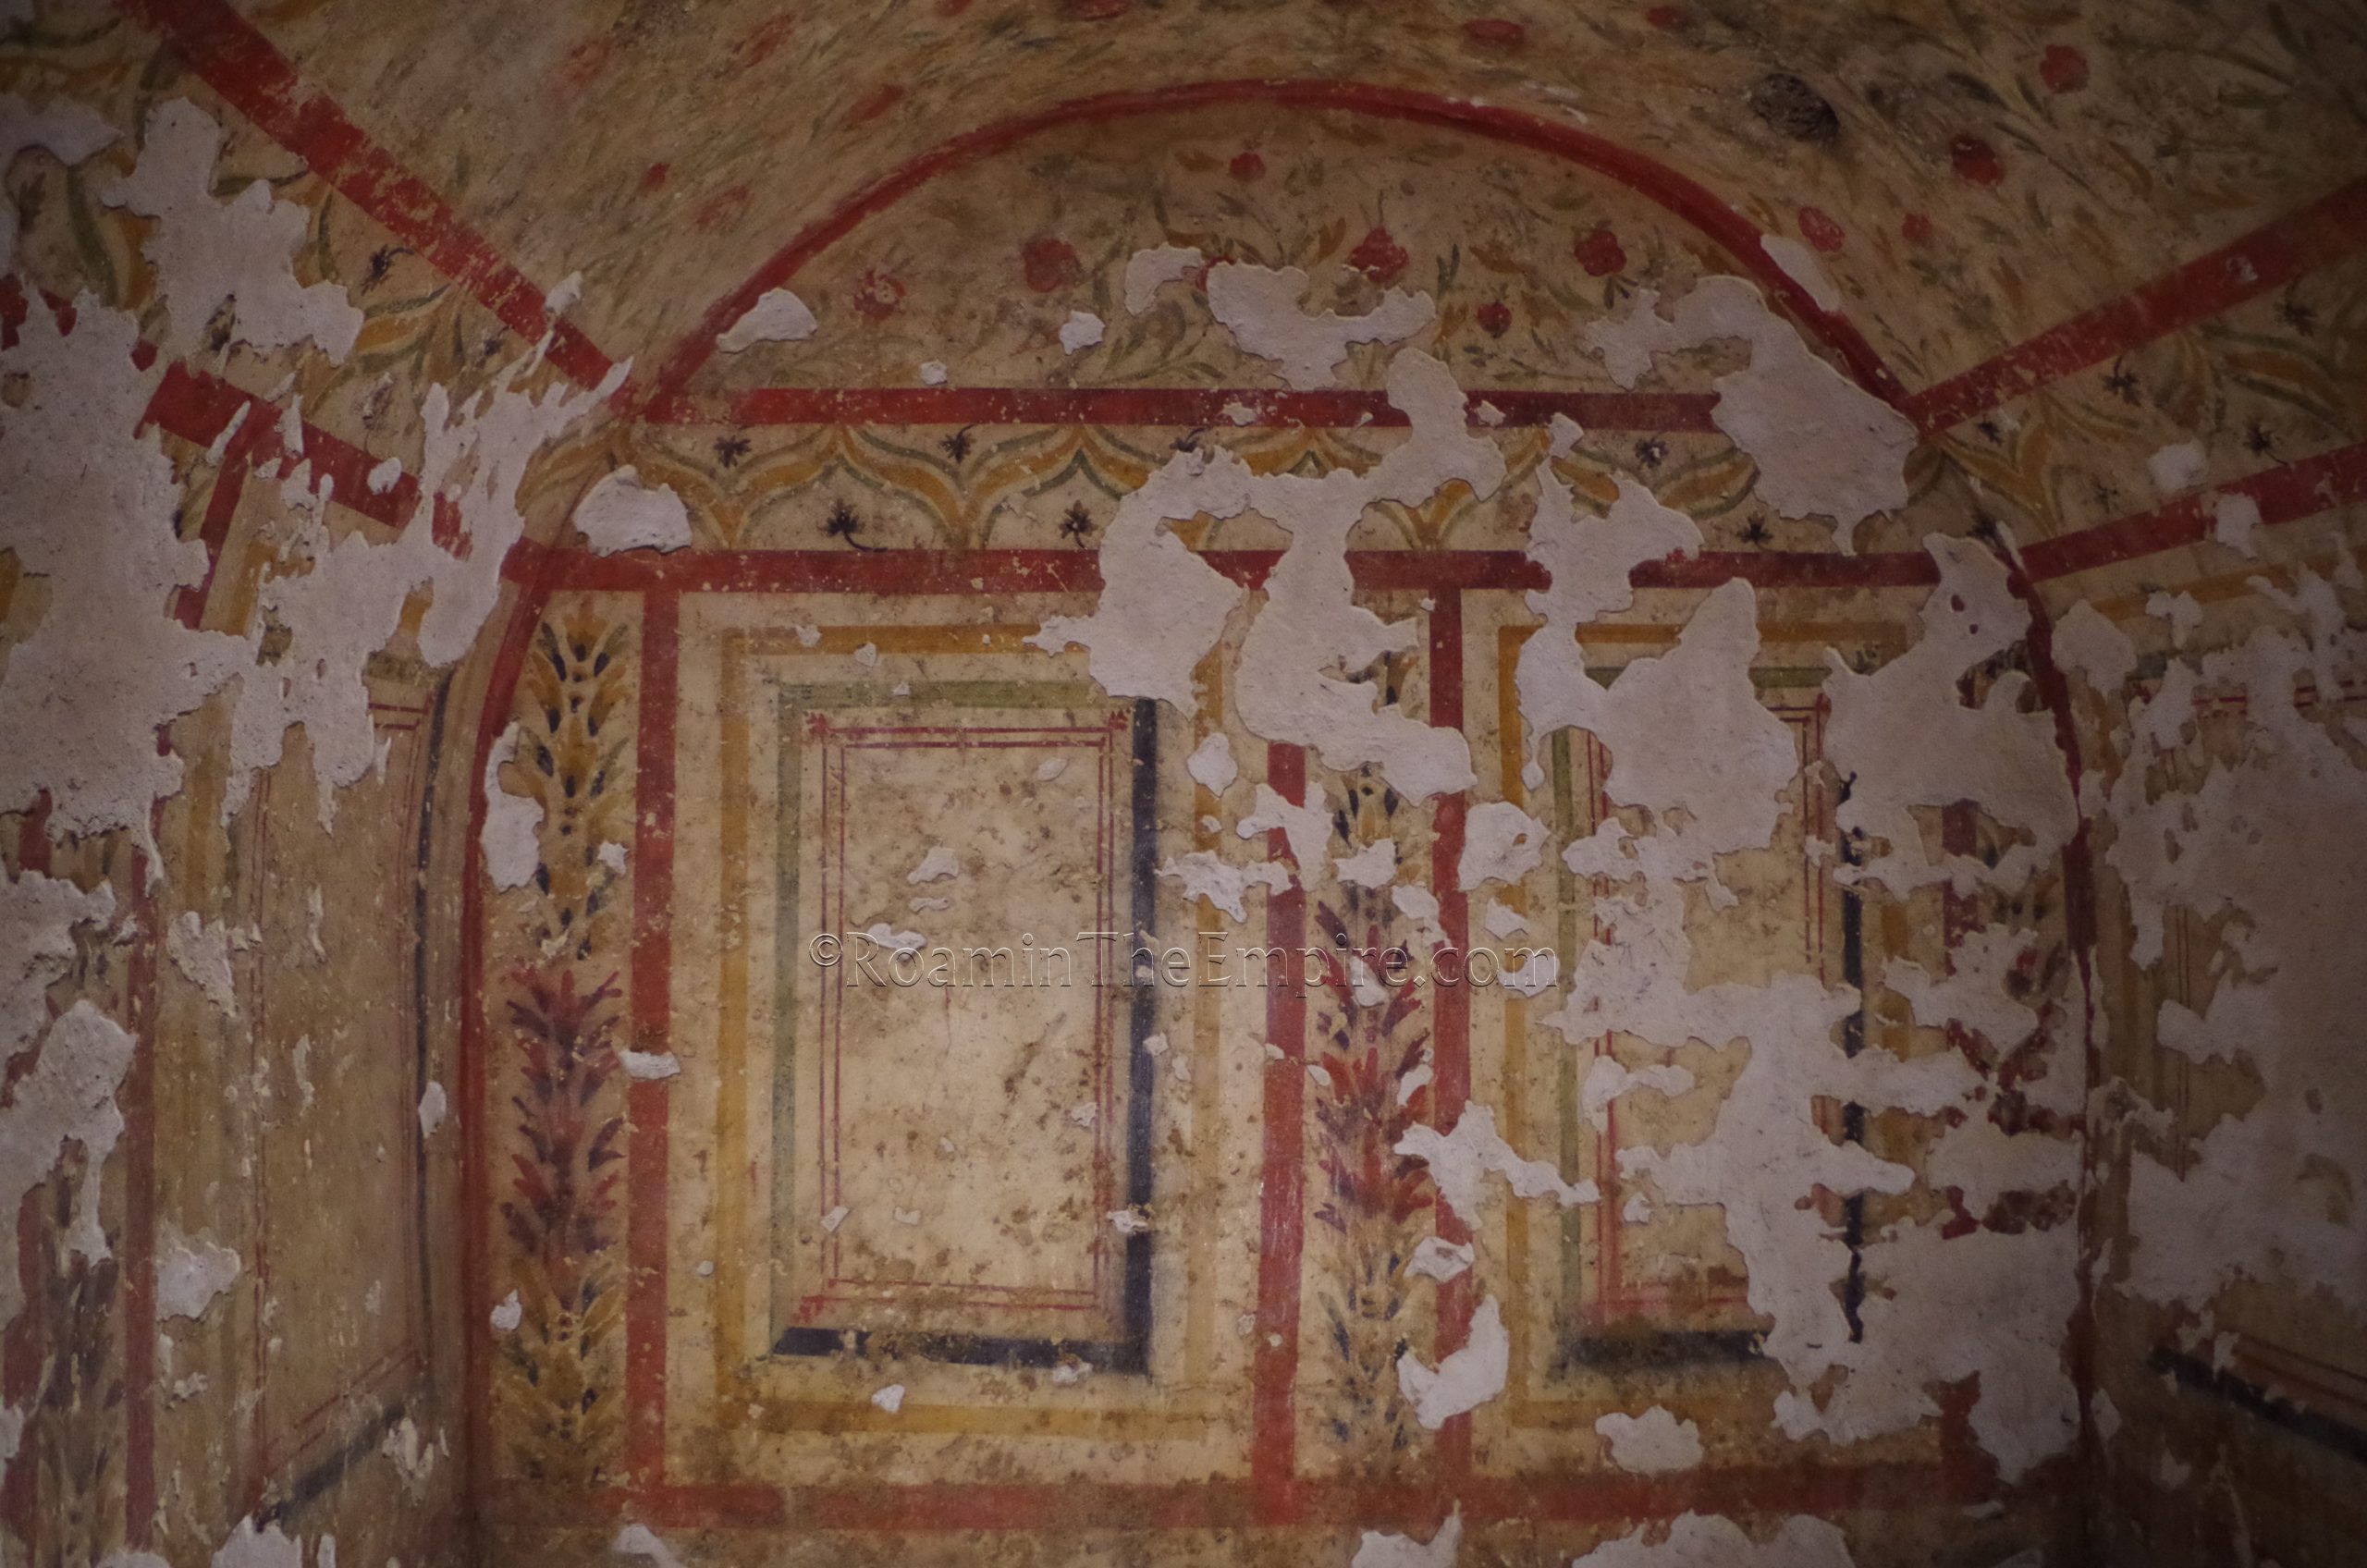 Painted tomb from the 4th century CE in the Saint Sophia Church crypt.